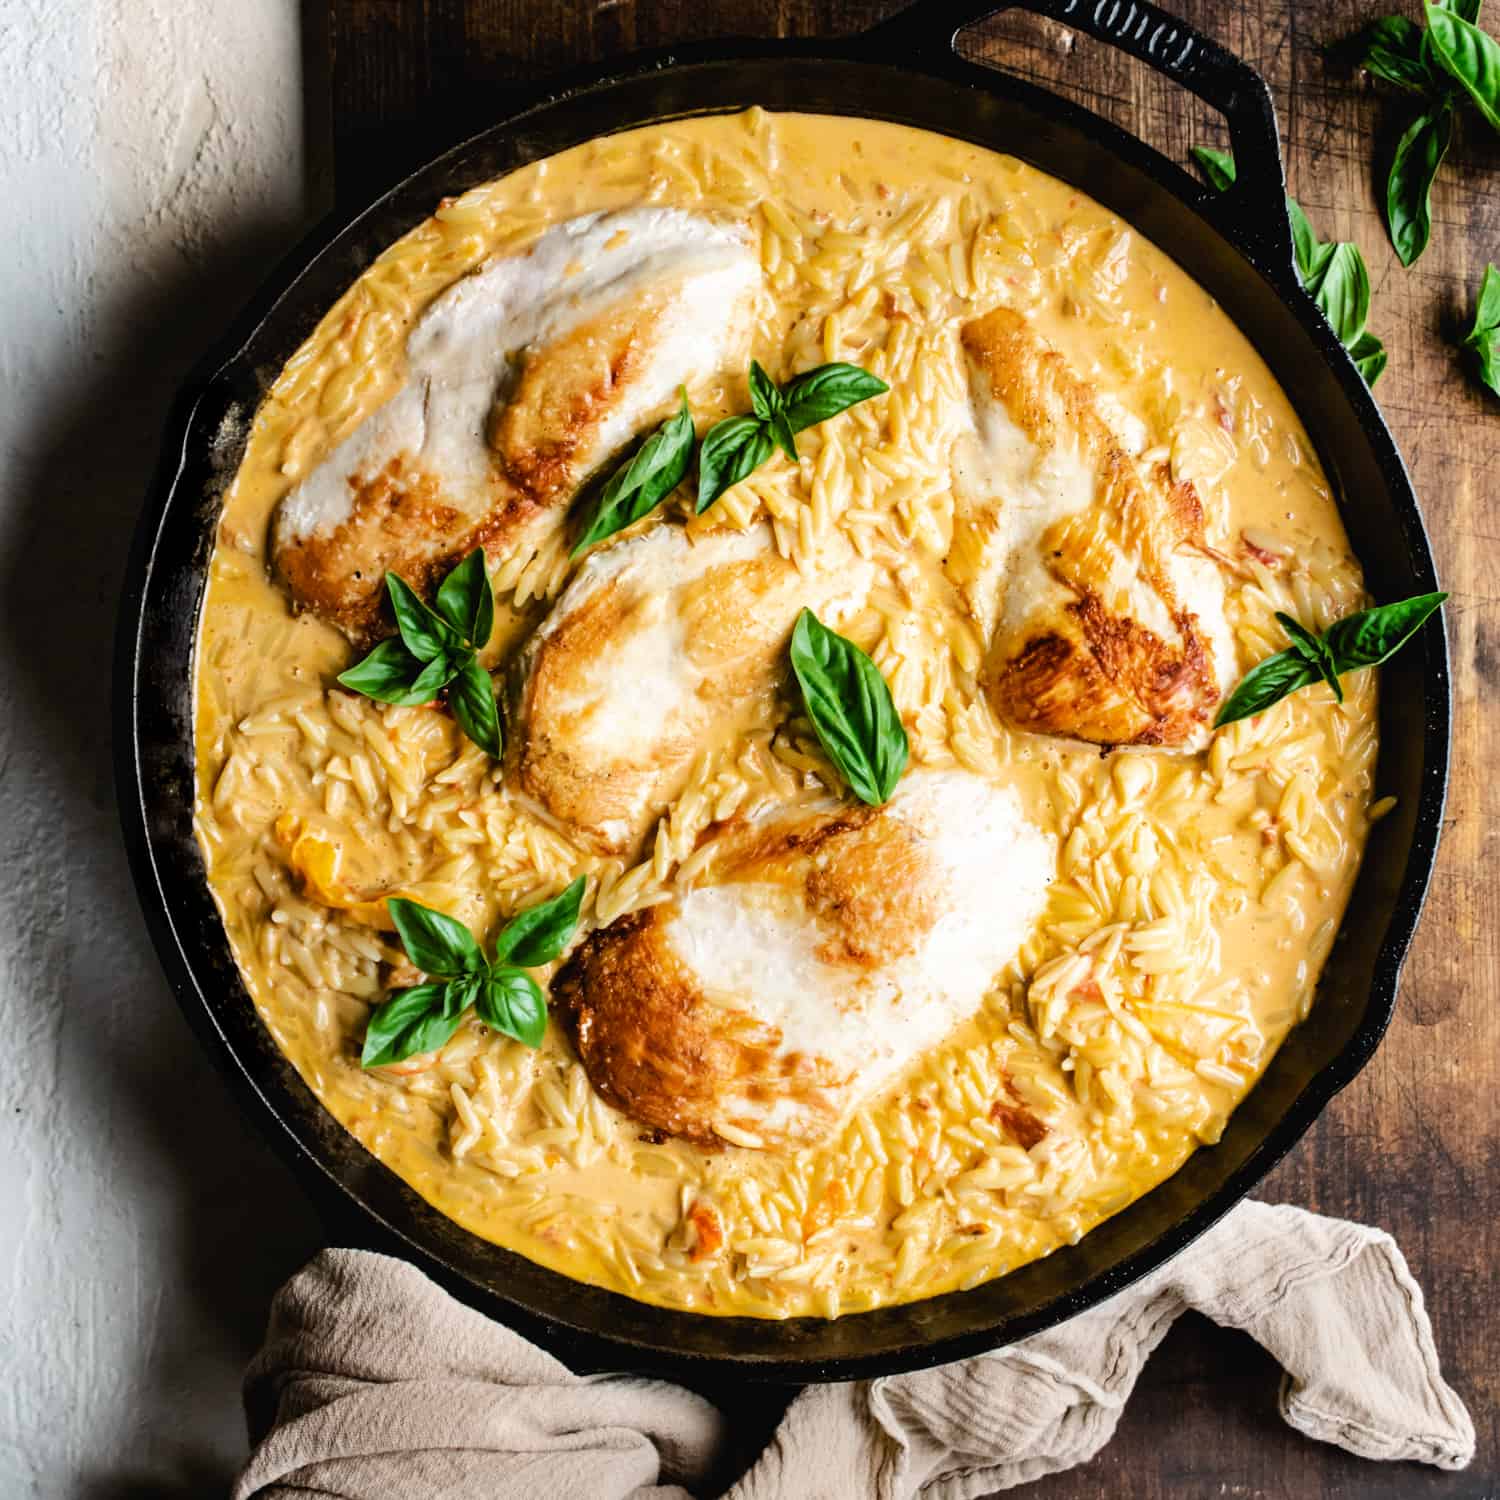 Cast iron skillet with taupe towel filled with orzo in a yellow, creamy sauce, topped with chicken breast.